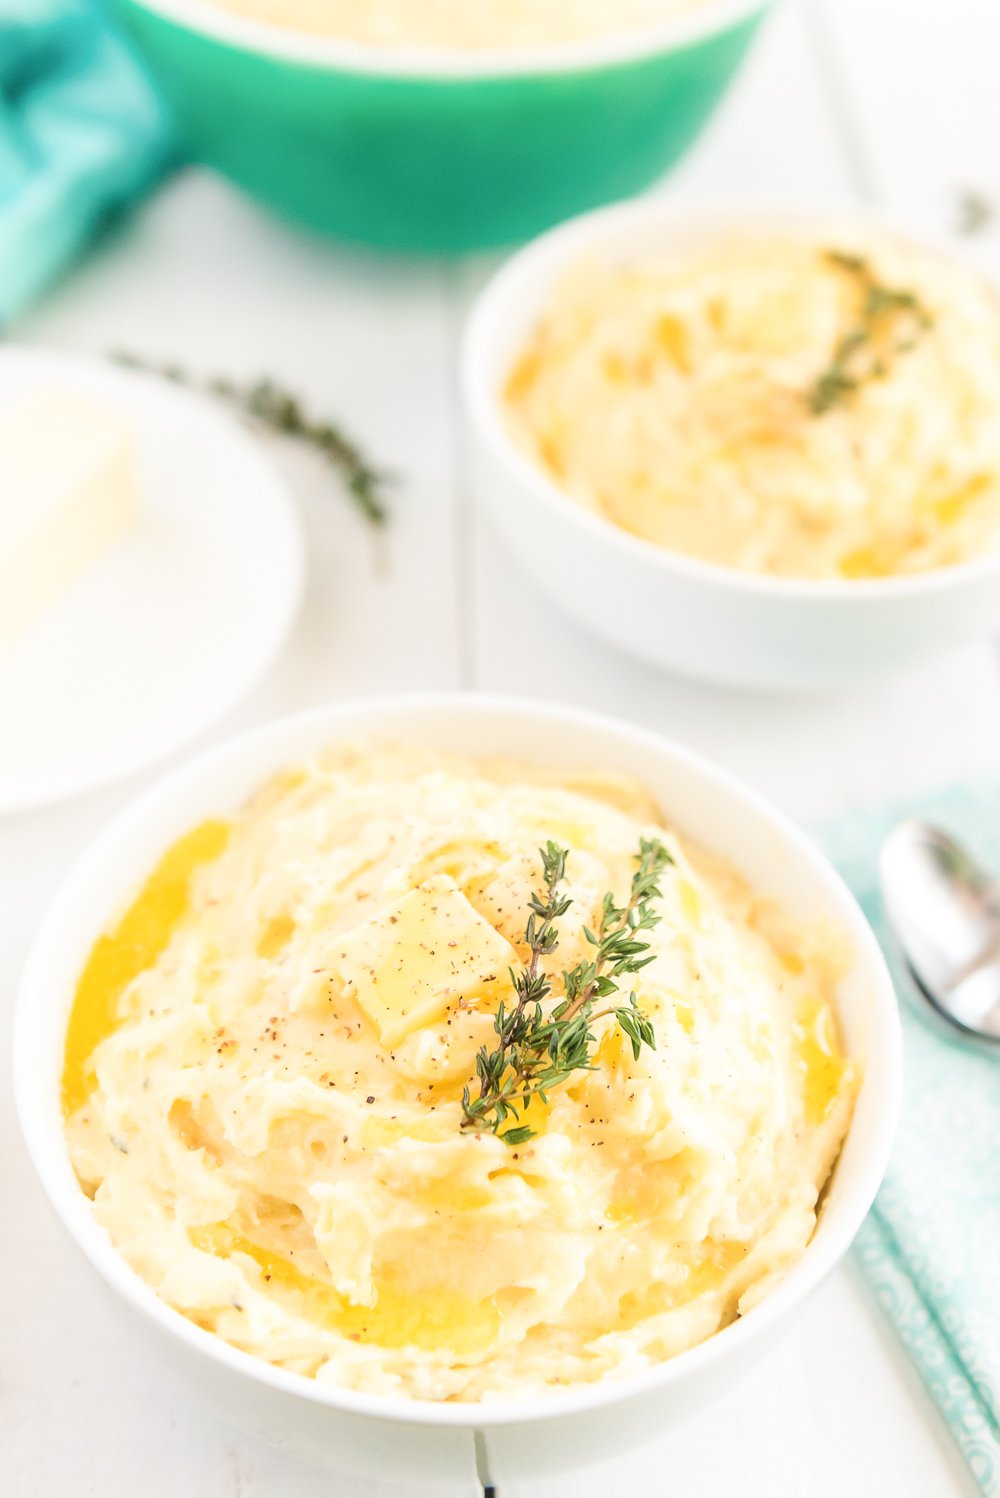 Bowl of Mashed Potatoes made with Yukon Gold, garlic, cream, butter, and thyme